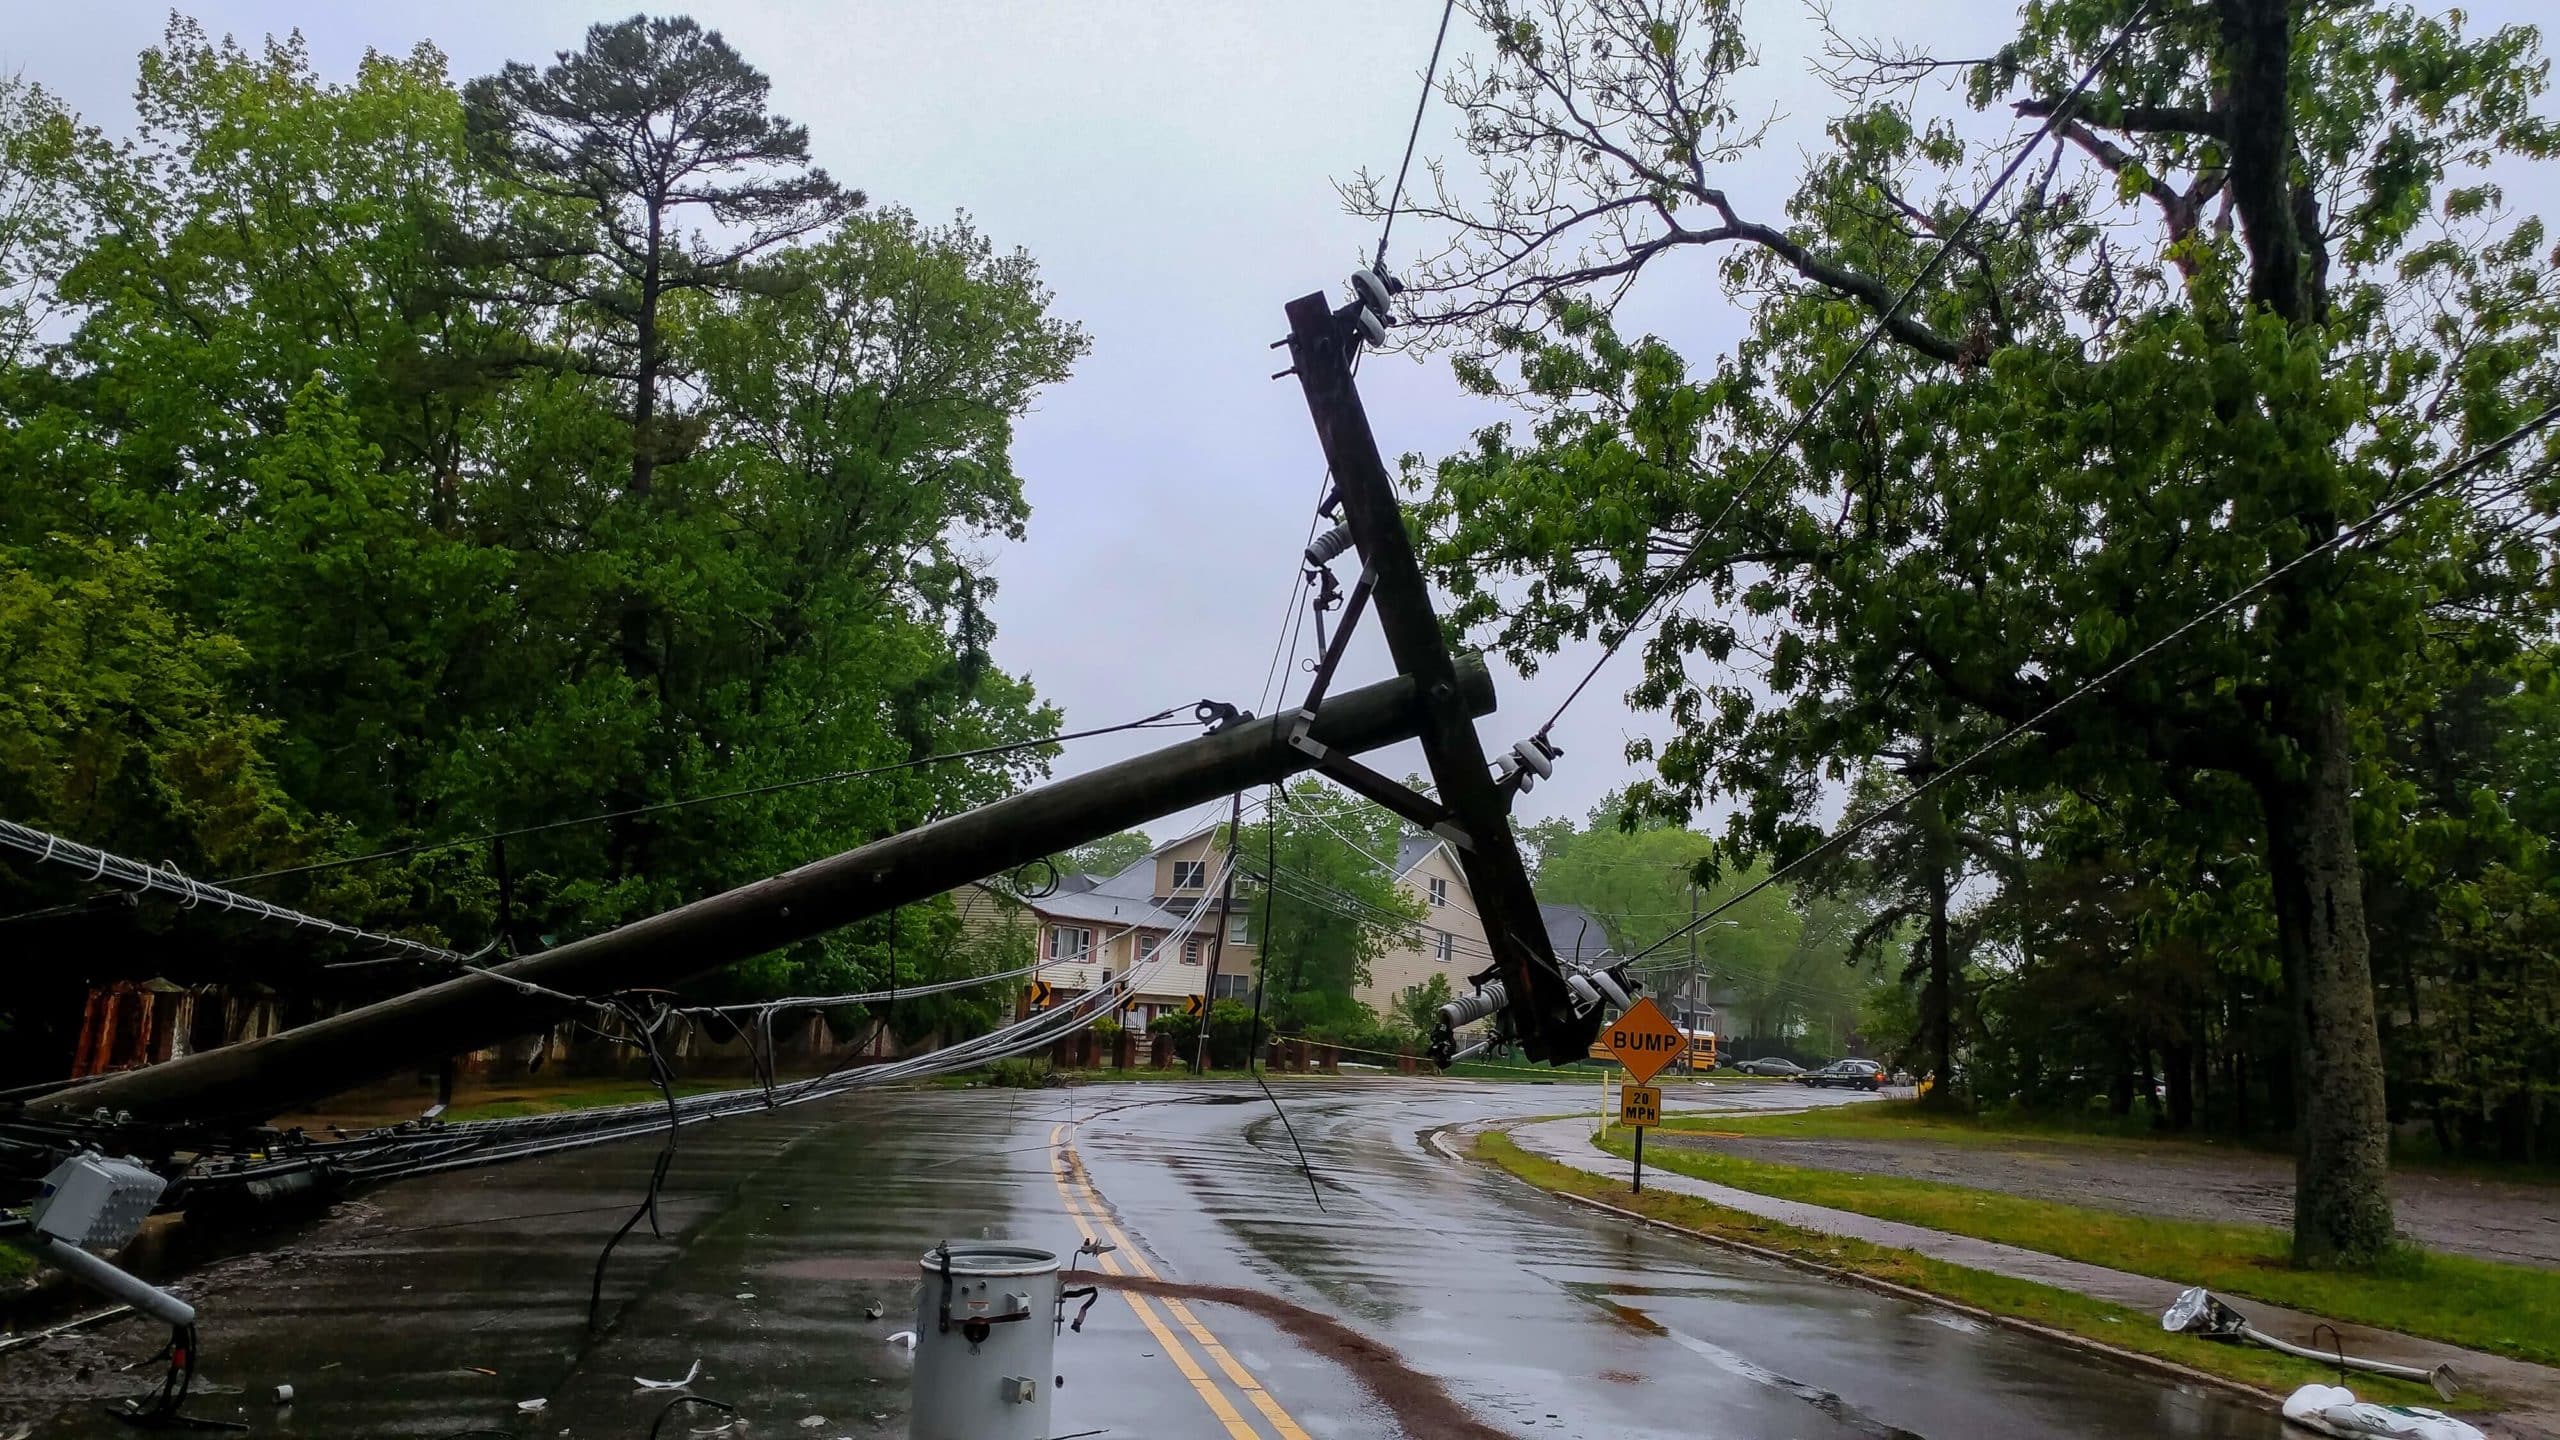 Downed power lines laying across a residential street